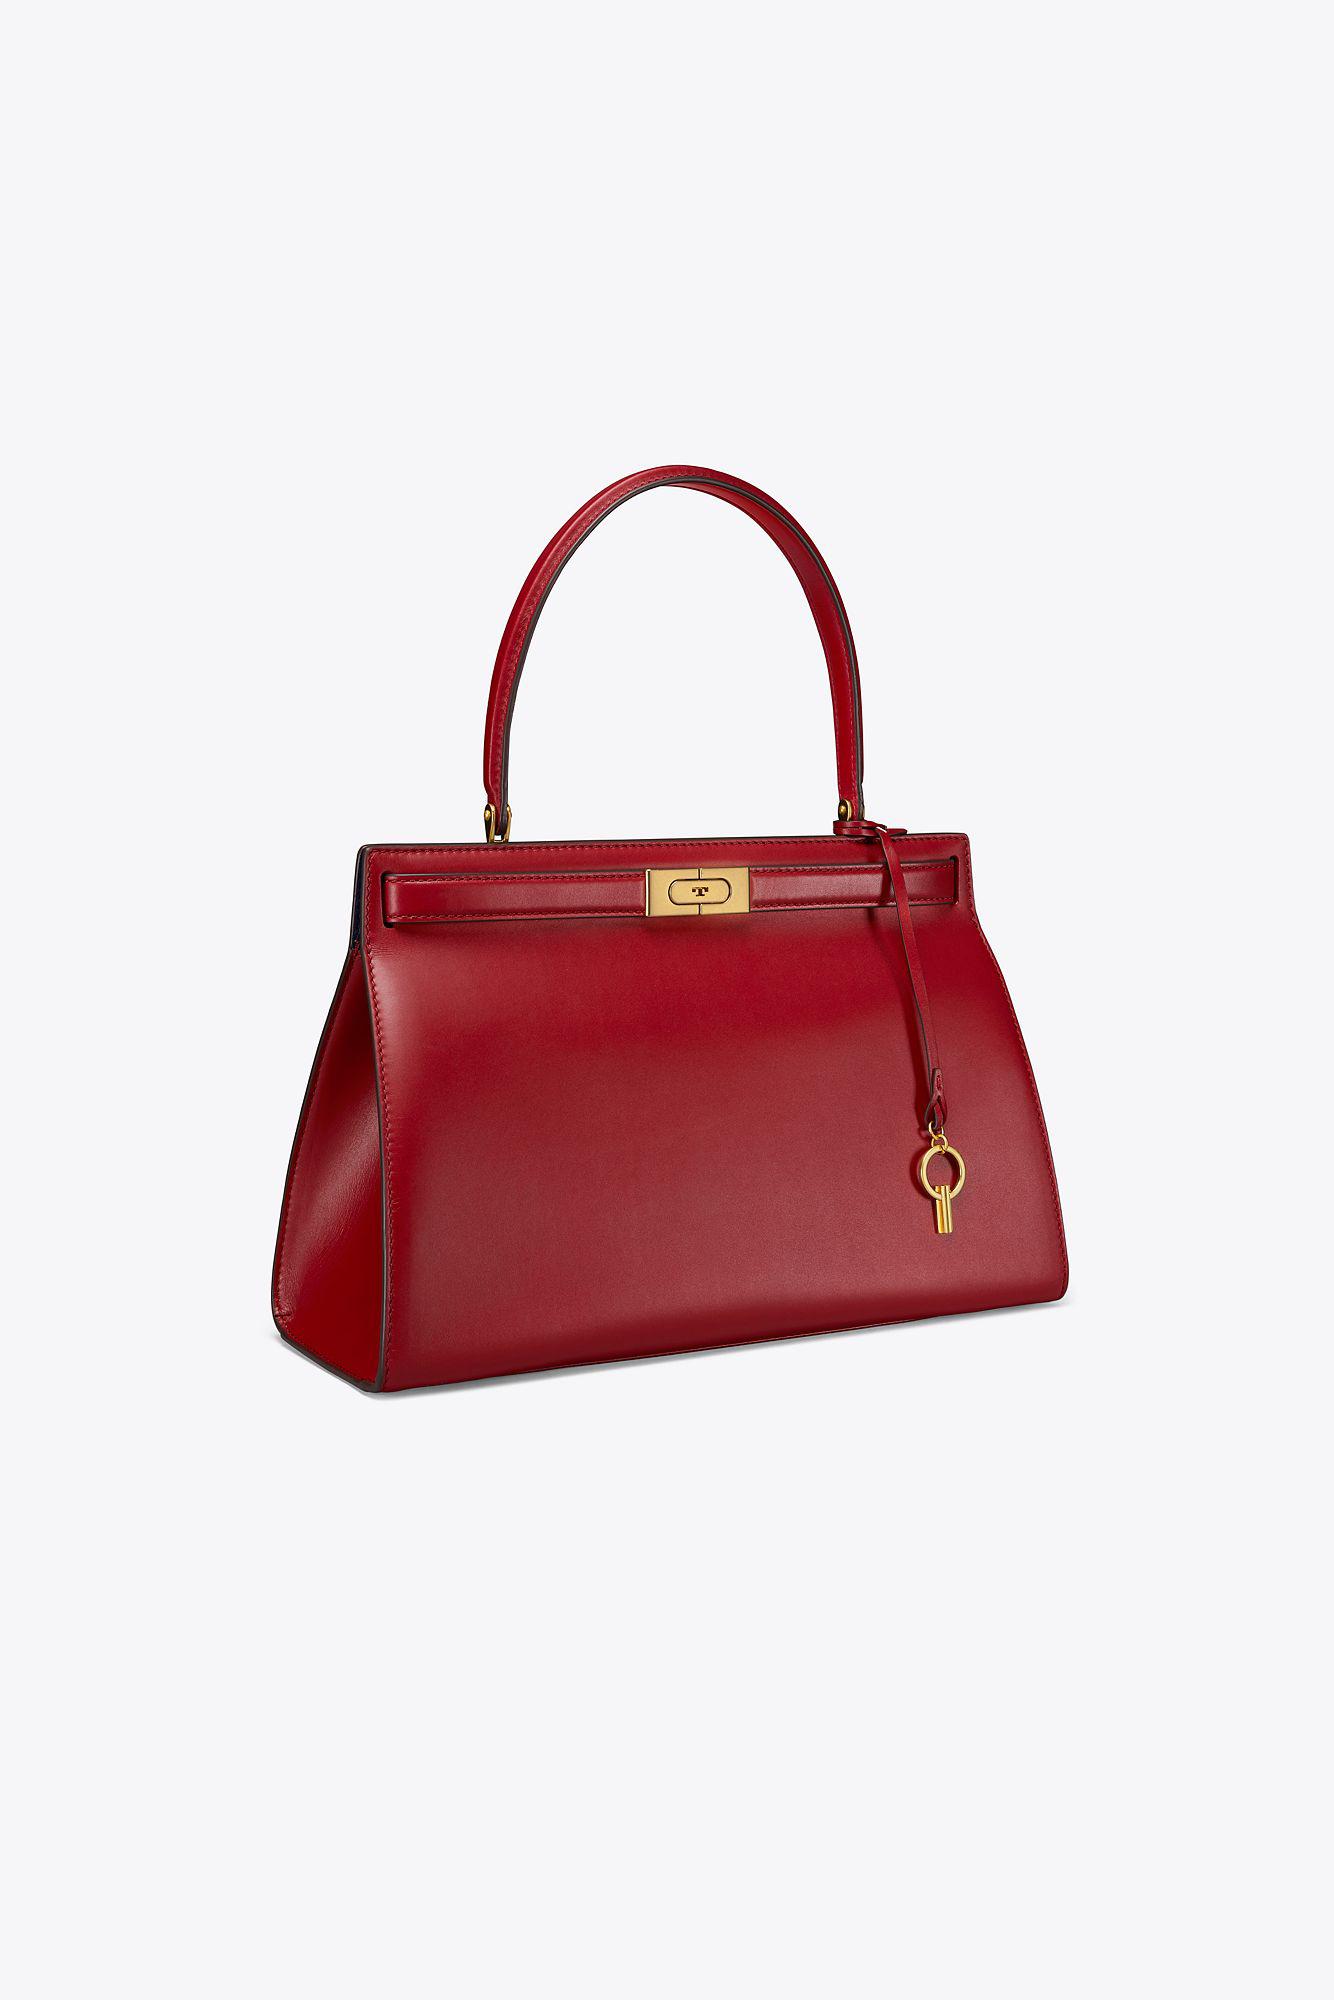 Tory Burch Lee Radziwill Bag in Red | Lyst